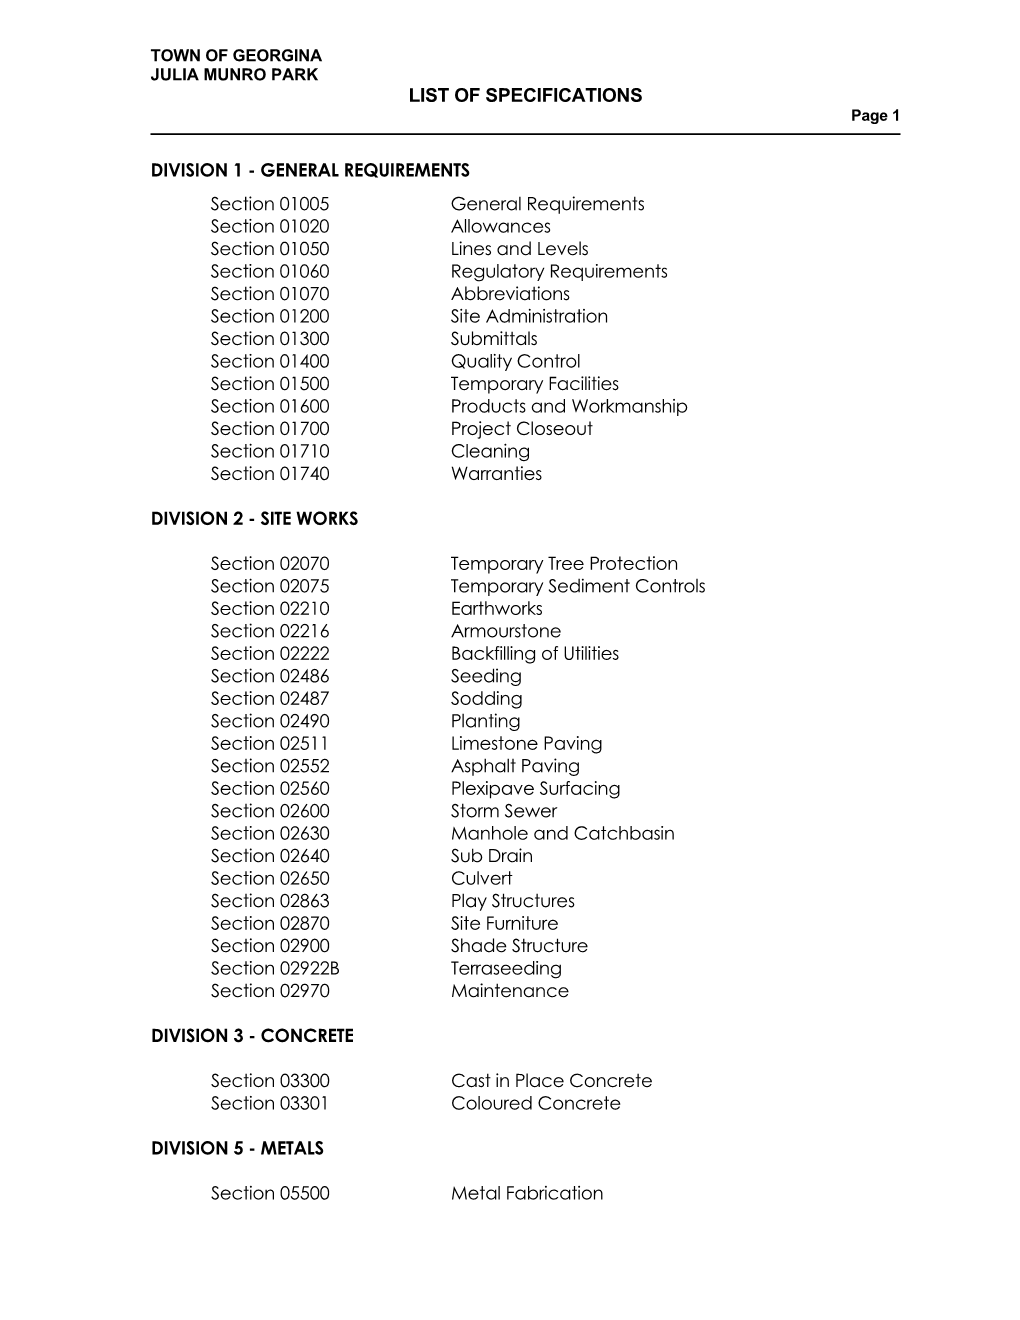 LIST of SPECIFICATIONS Page 1